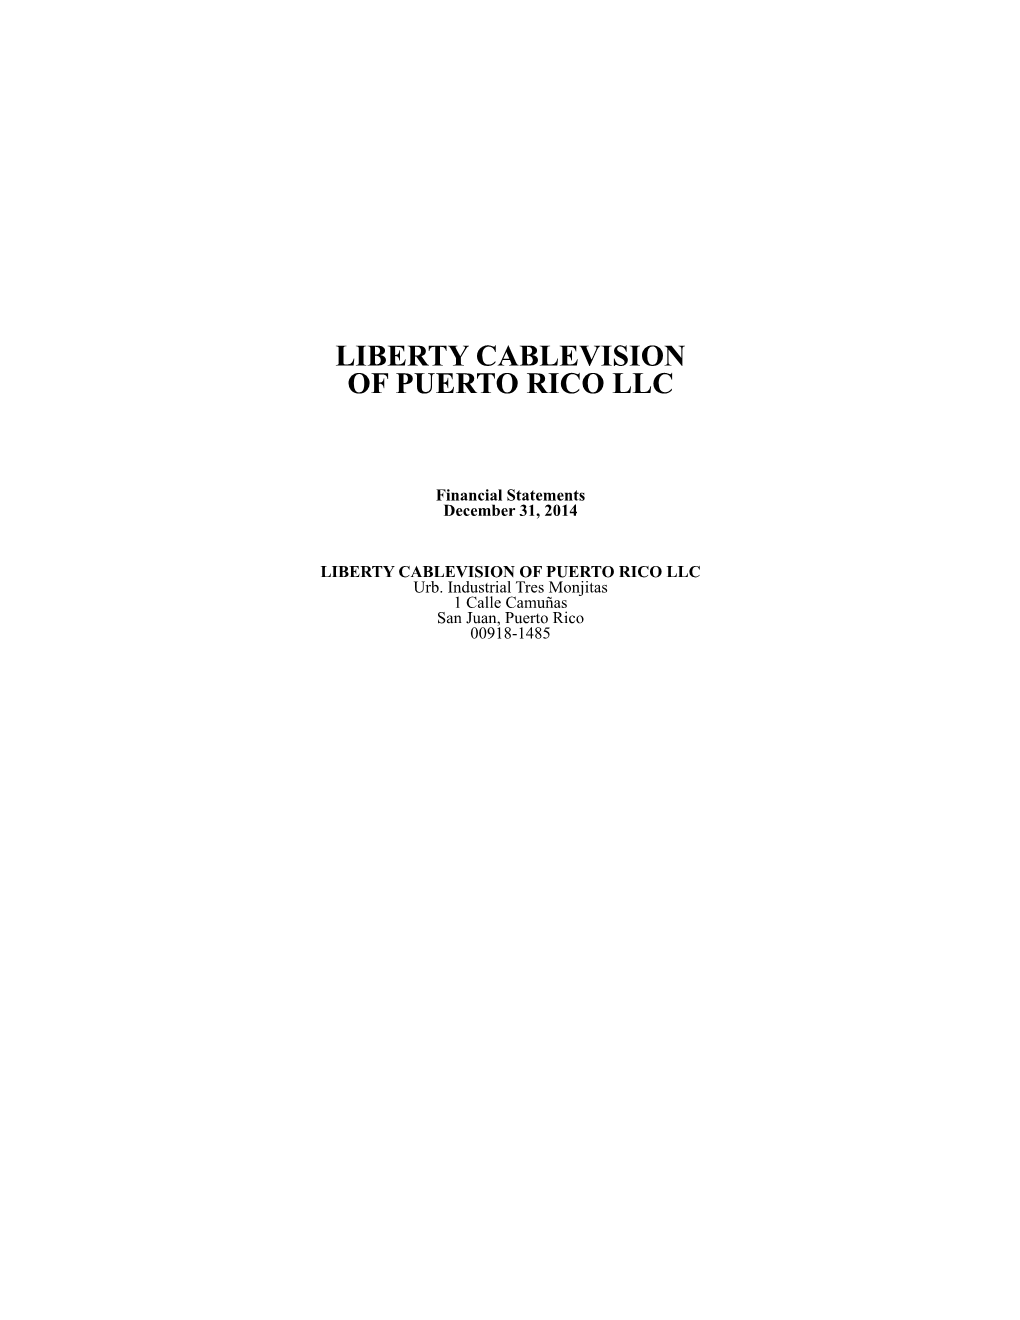 Liberty Cablevision of Puerto Rico Llc